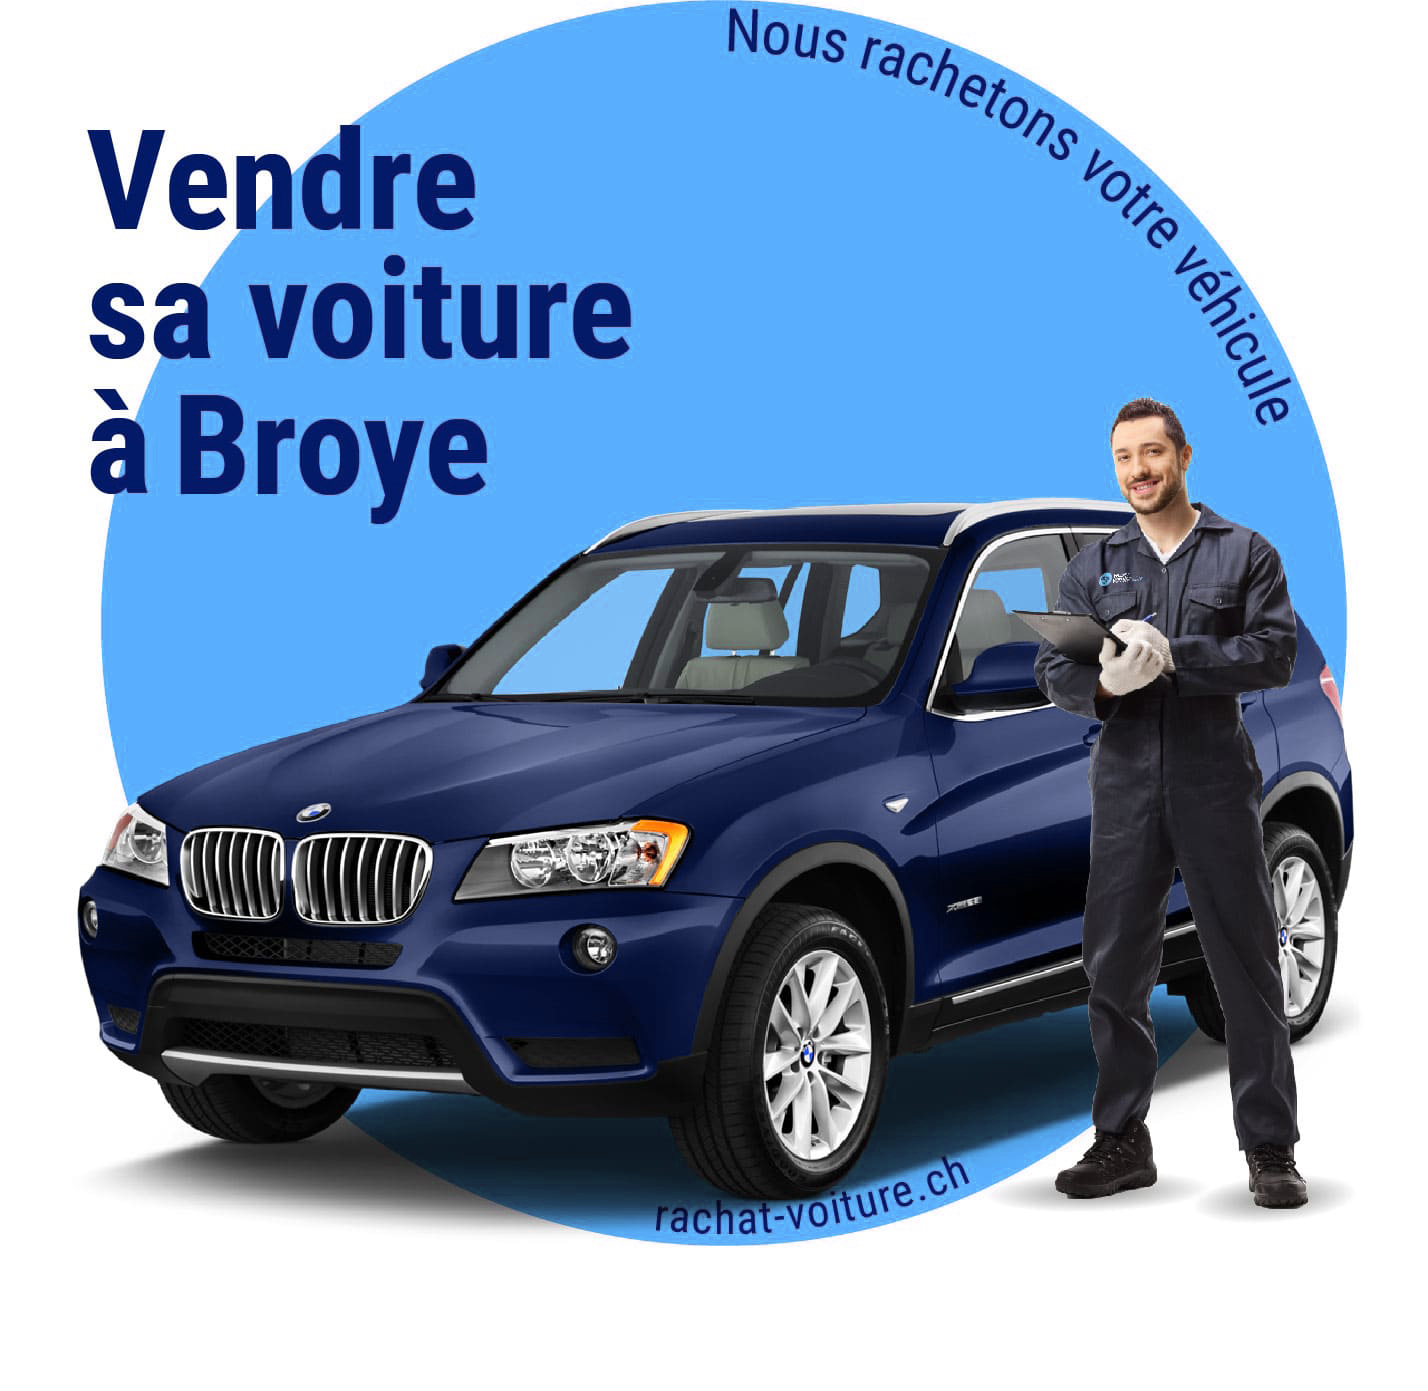 Vendre sa voiture à Broye